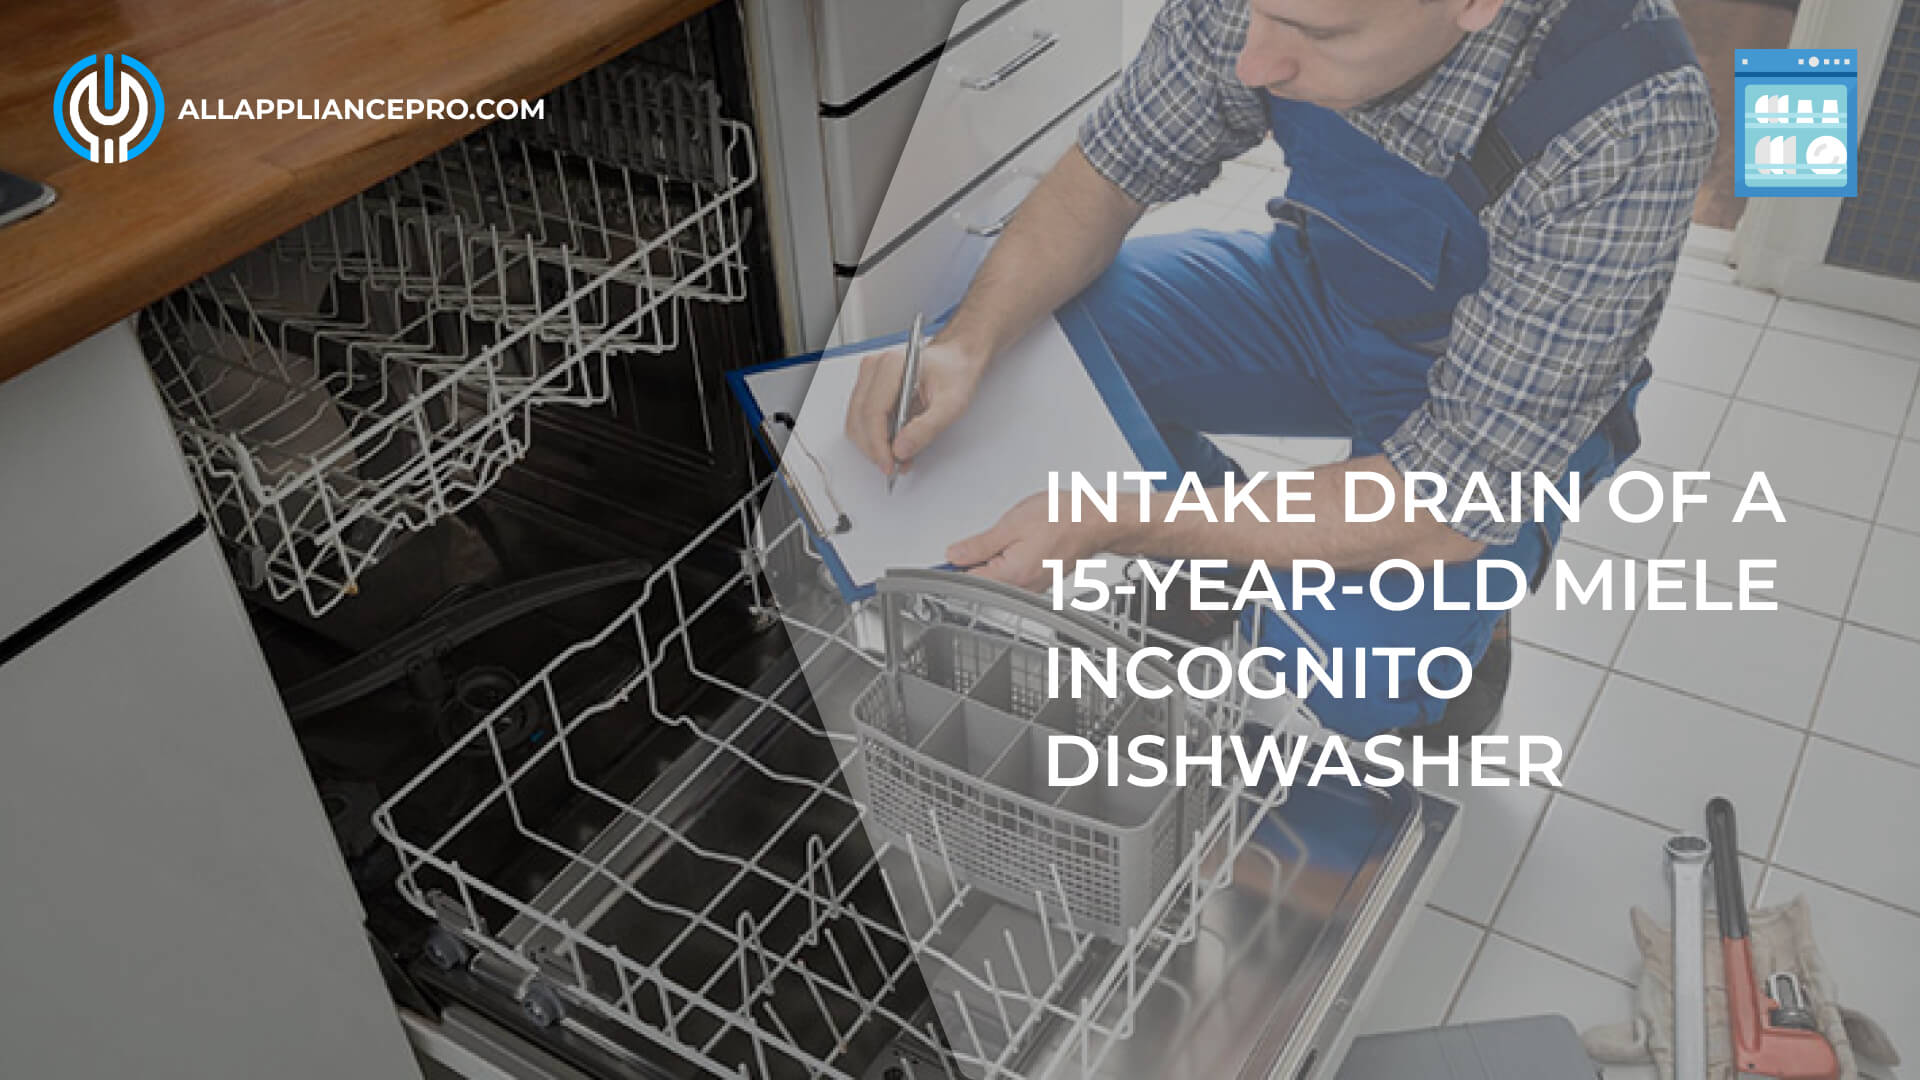 Fixing the Intake Drain of a 15-Year-Old Miele Incognito Dishwasher